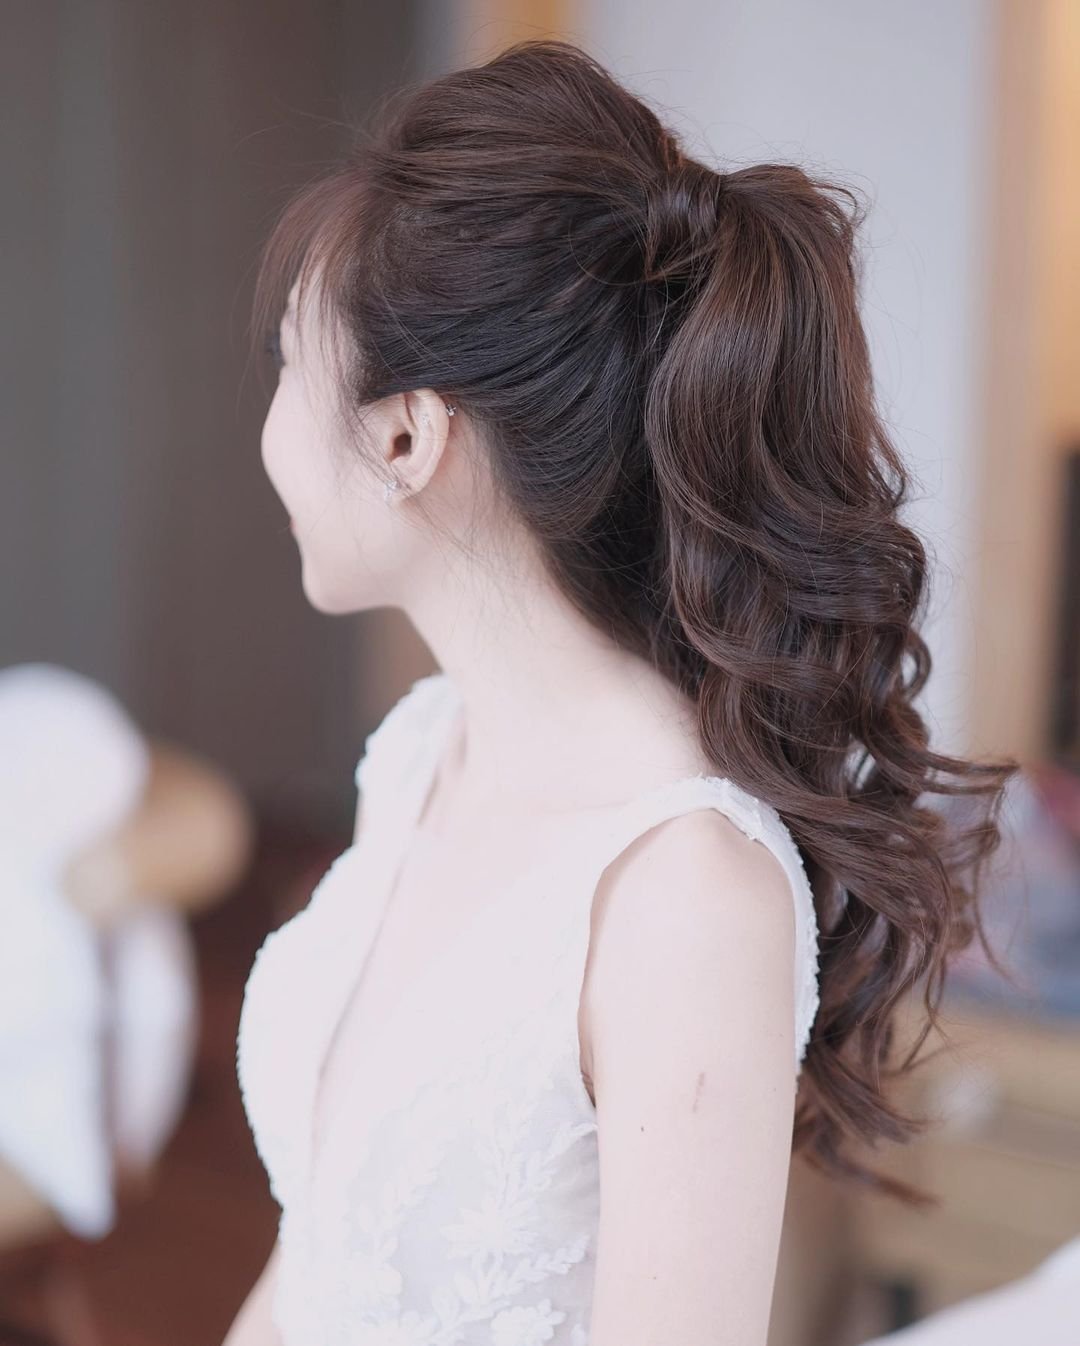 21023 Asian Ponytail Hairstyles Photos and Premium High Res Pictures   Getty Images